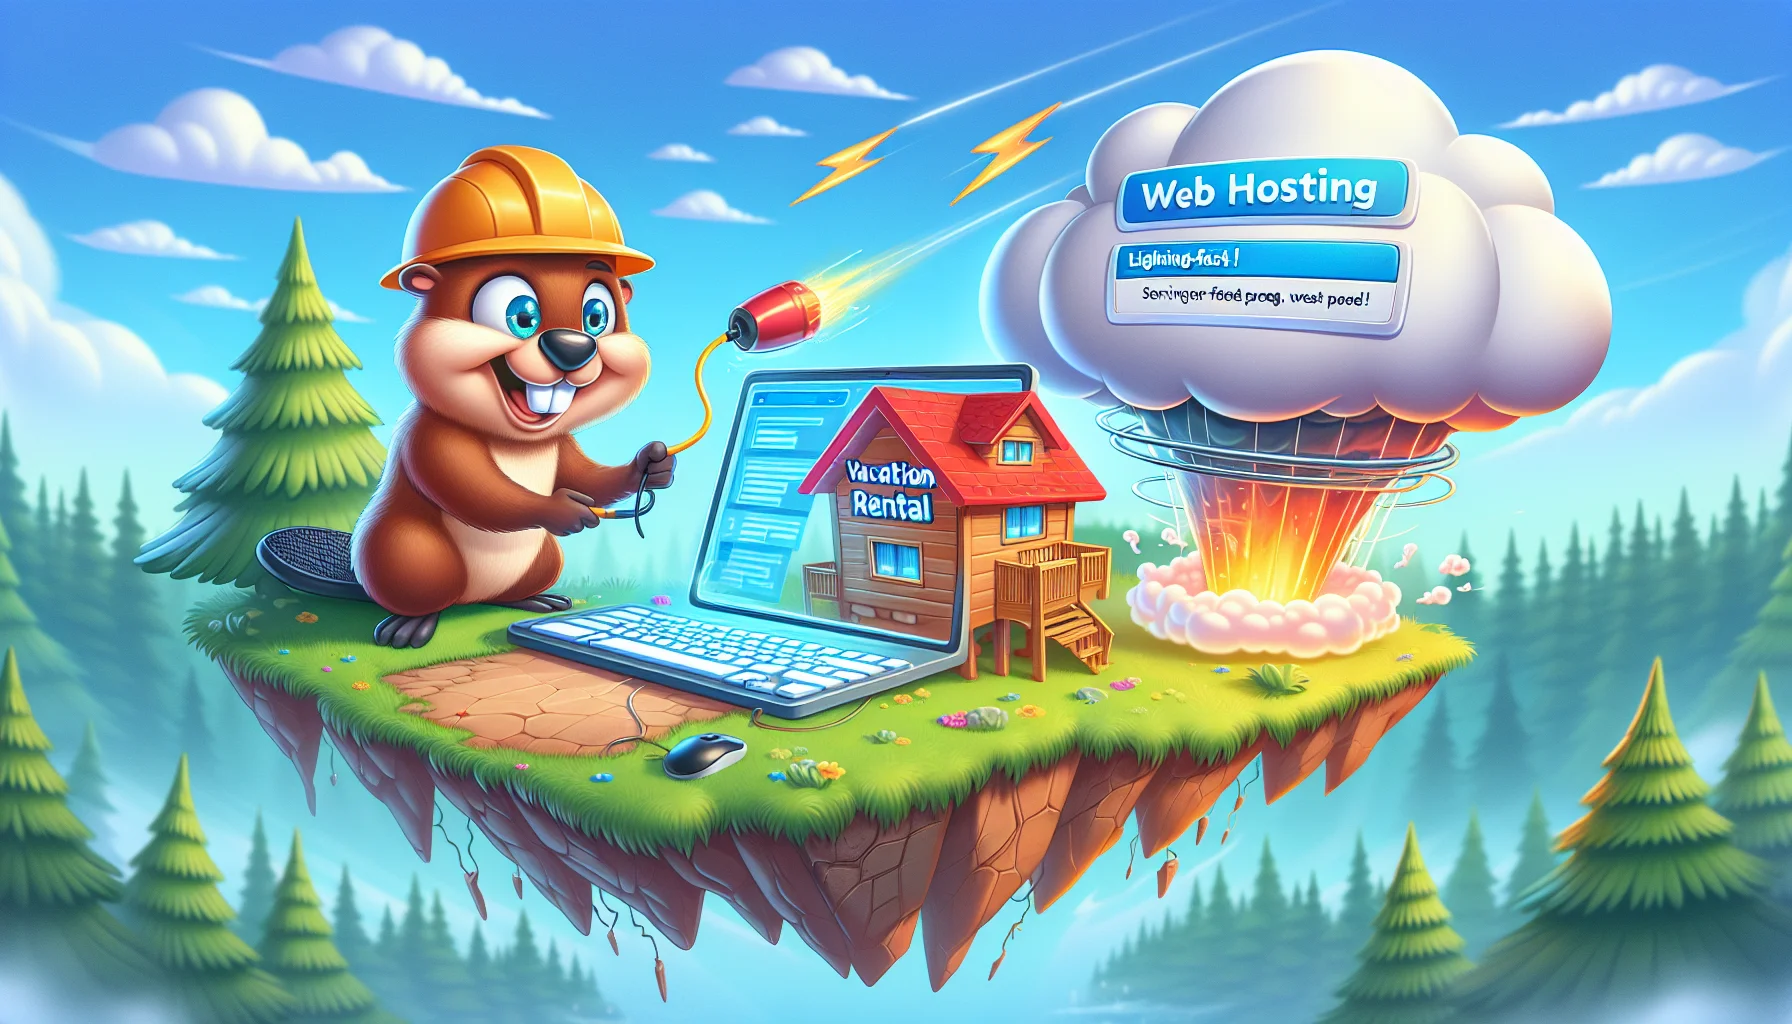 Imagine a light-hearted and humorous scenario involving a vacation rental website builder. The site builder is caricatured as a busy beaver with a hard hat typing away on a large, futuristic computer floating in mid-air. The beaver is in the middle of constructing a digital house, representative of the vacation rental website. On one side of the image, there's a cloud with a 'web hosting' label offering services like lightning-fast speed, represented by little lightning bolts racing around the cloud. The scene is set in a vibrant and lush forest environment adding a dash of fun to the entire scene.